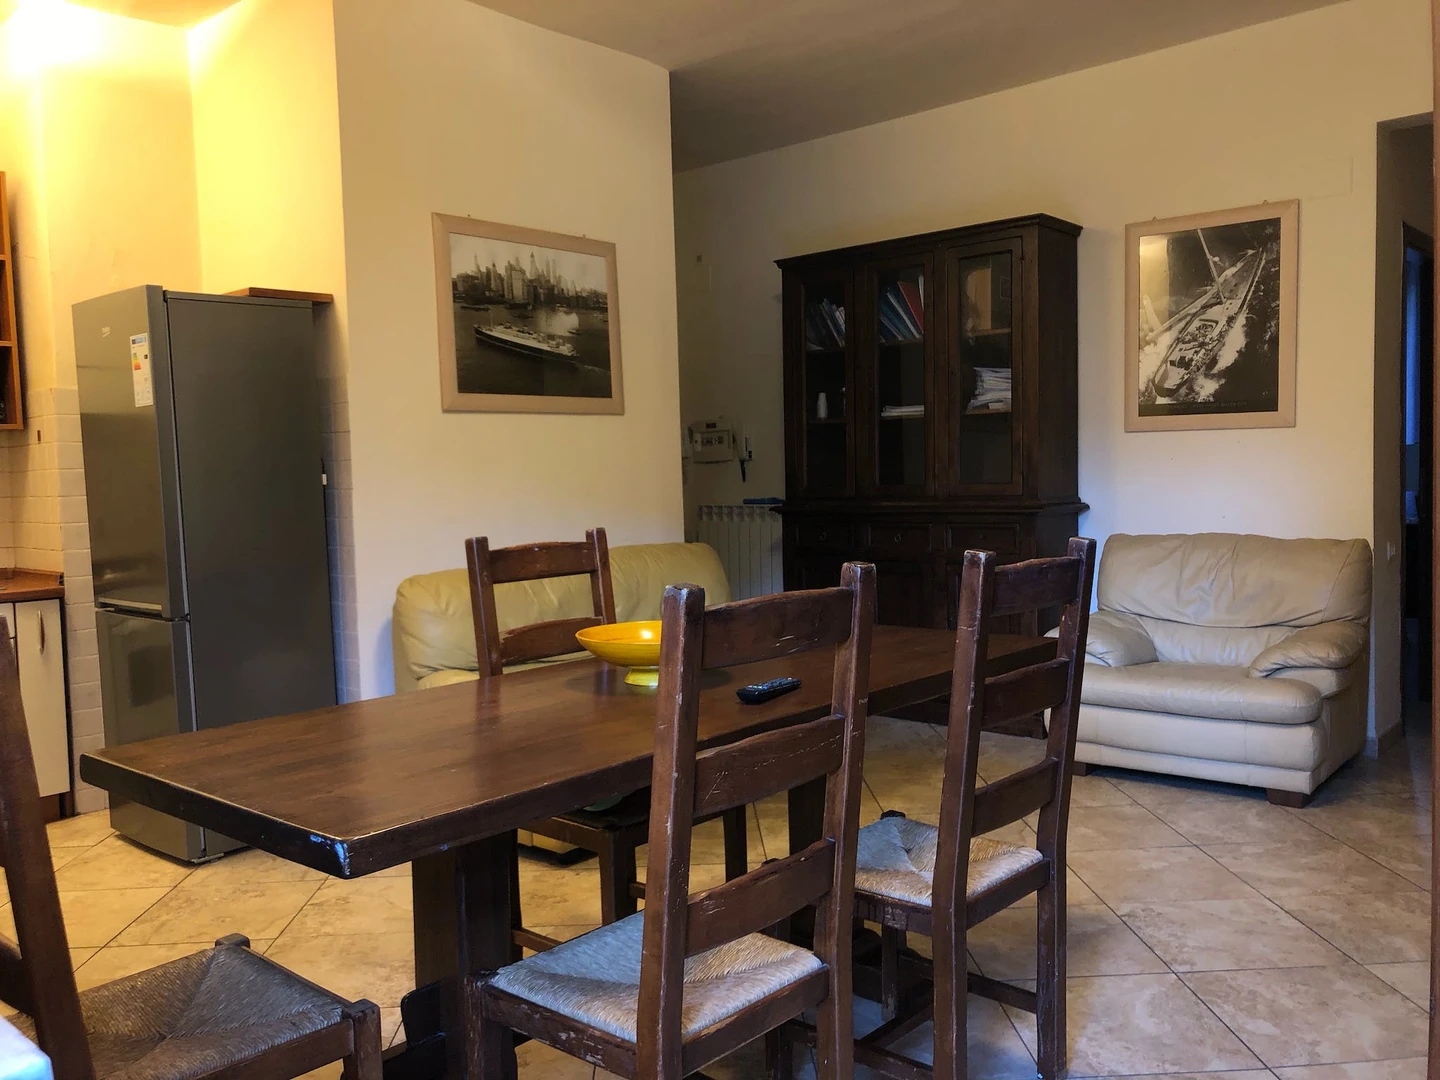 Room for rent in a shared flat in Siena